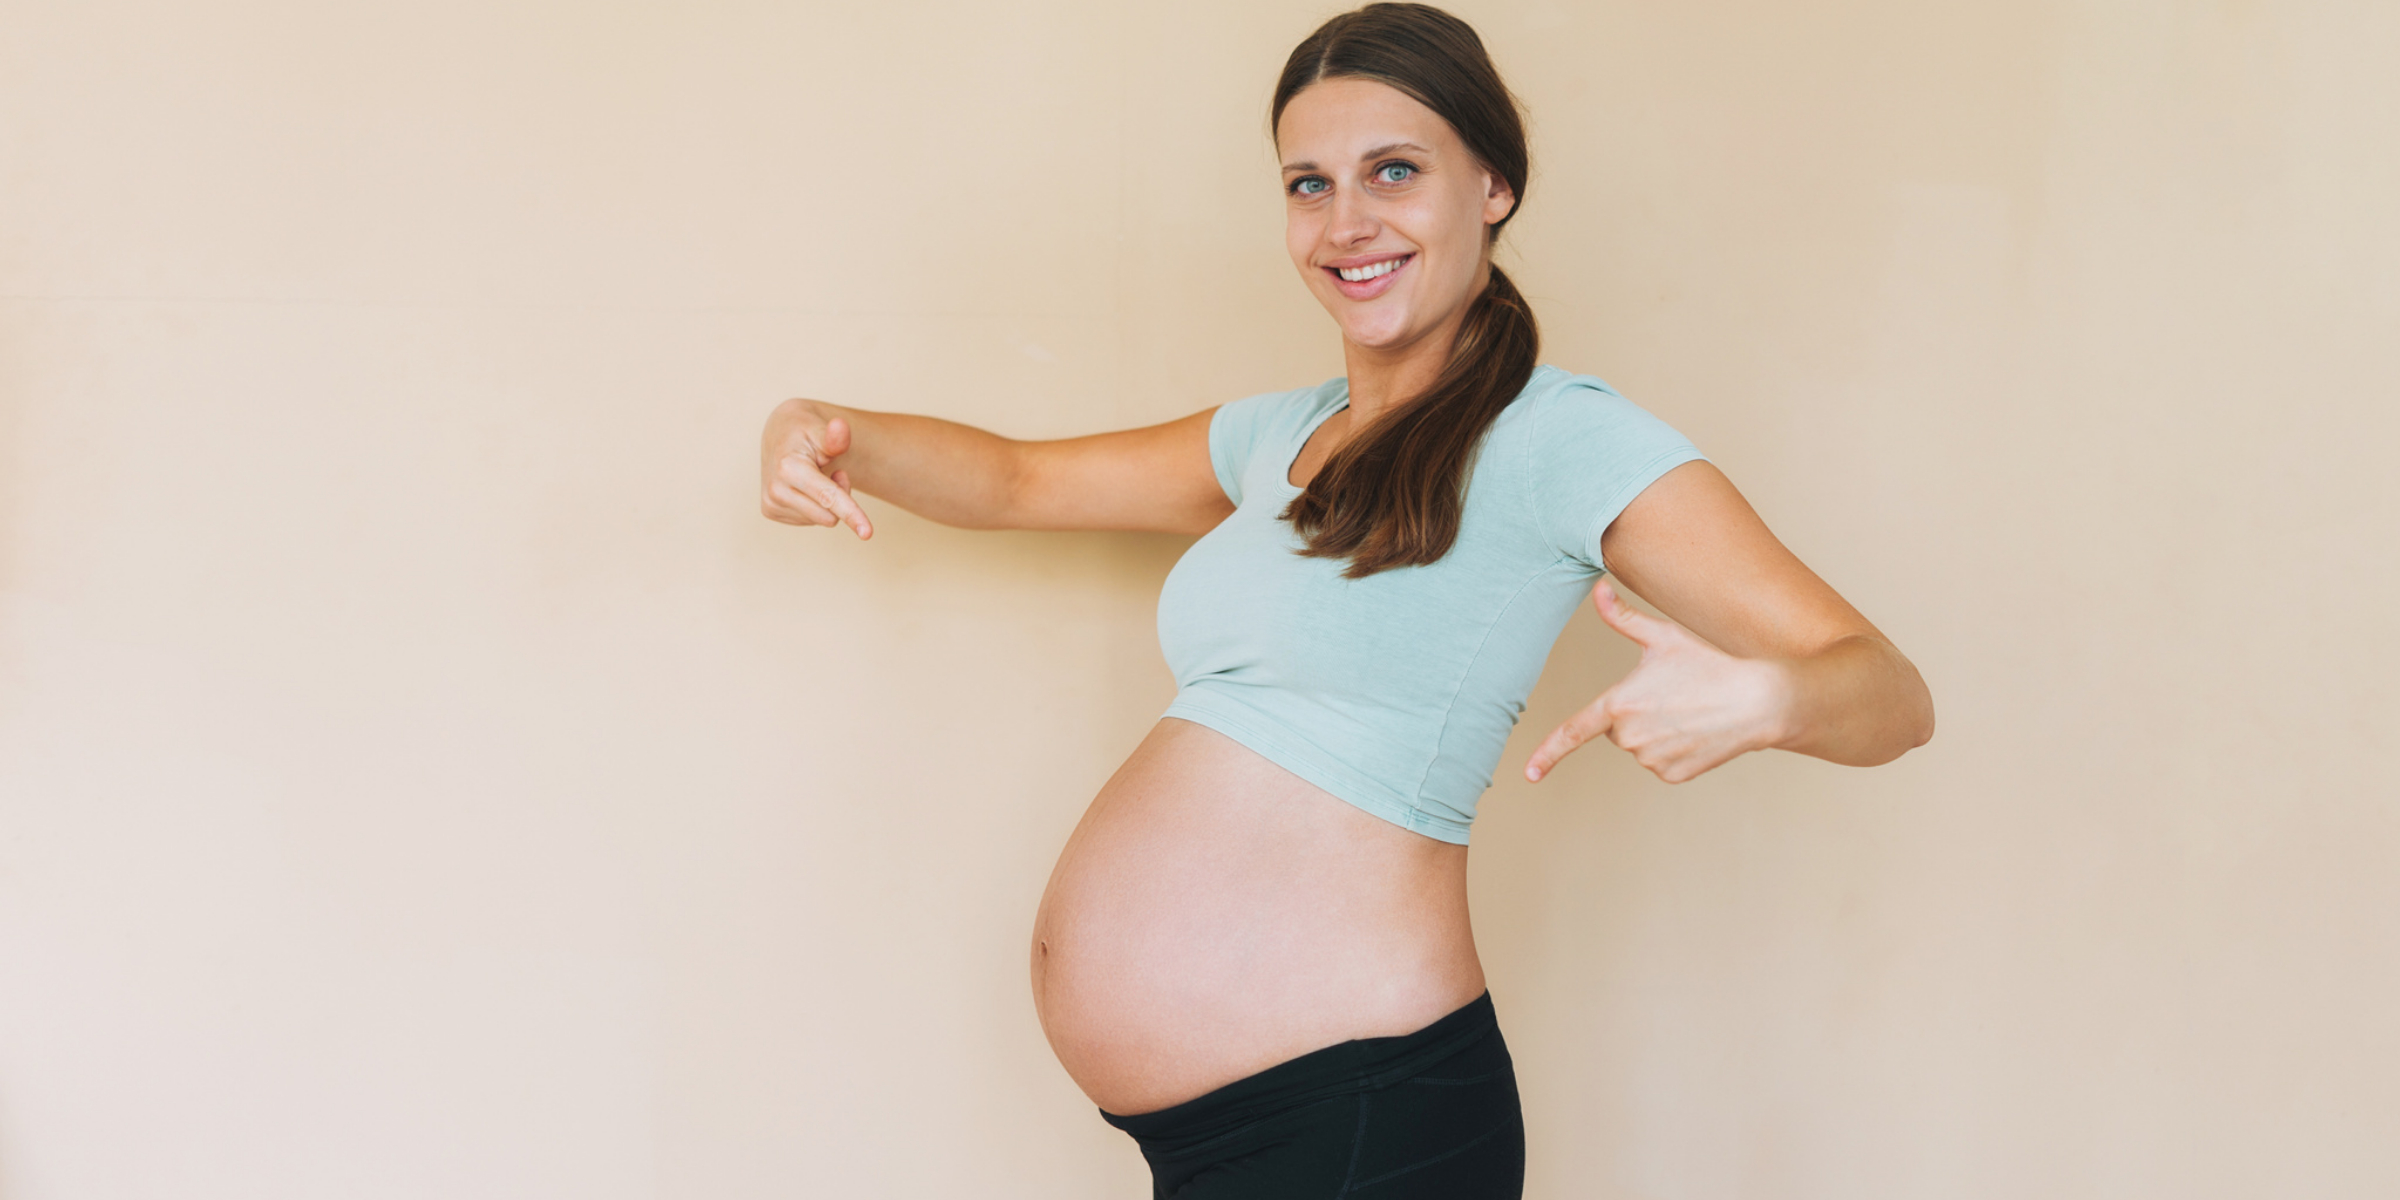 A pregnant woman is pointing her finger at the camera.